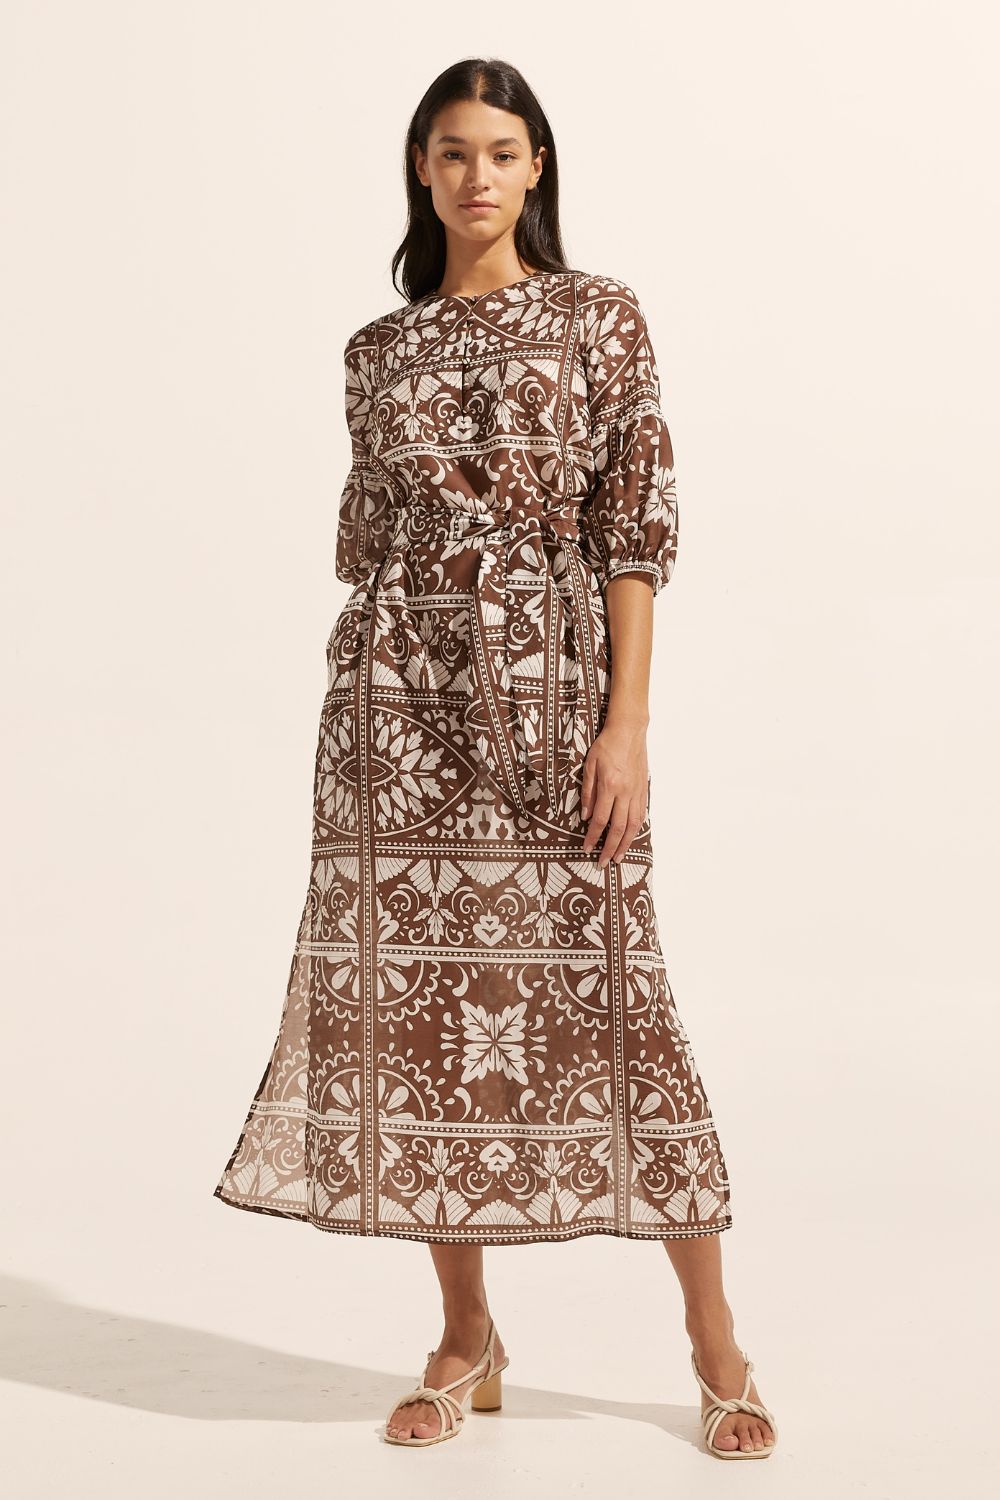 brown and white print, fabric self tie belt, mid length sleeve, rounded neckline, side splits, front view